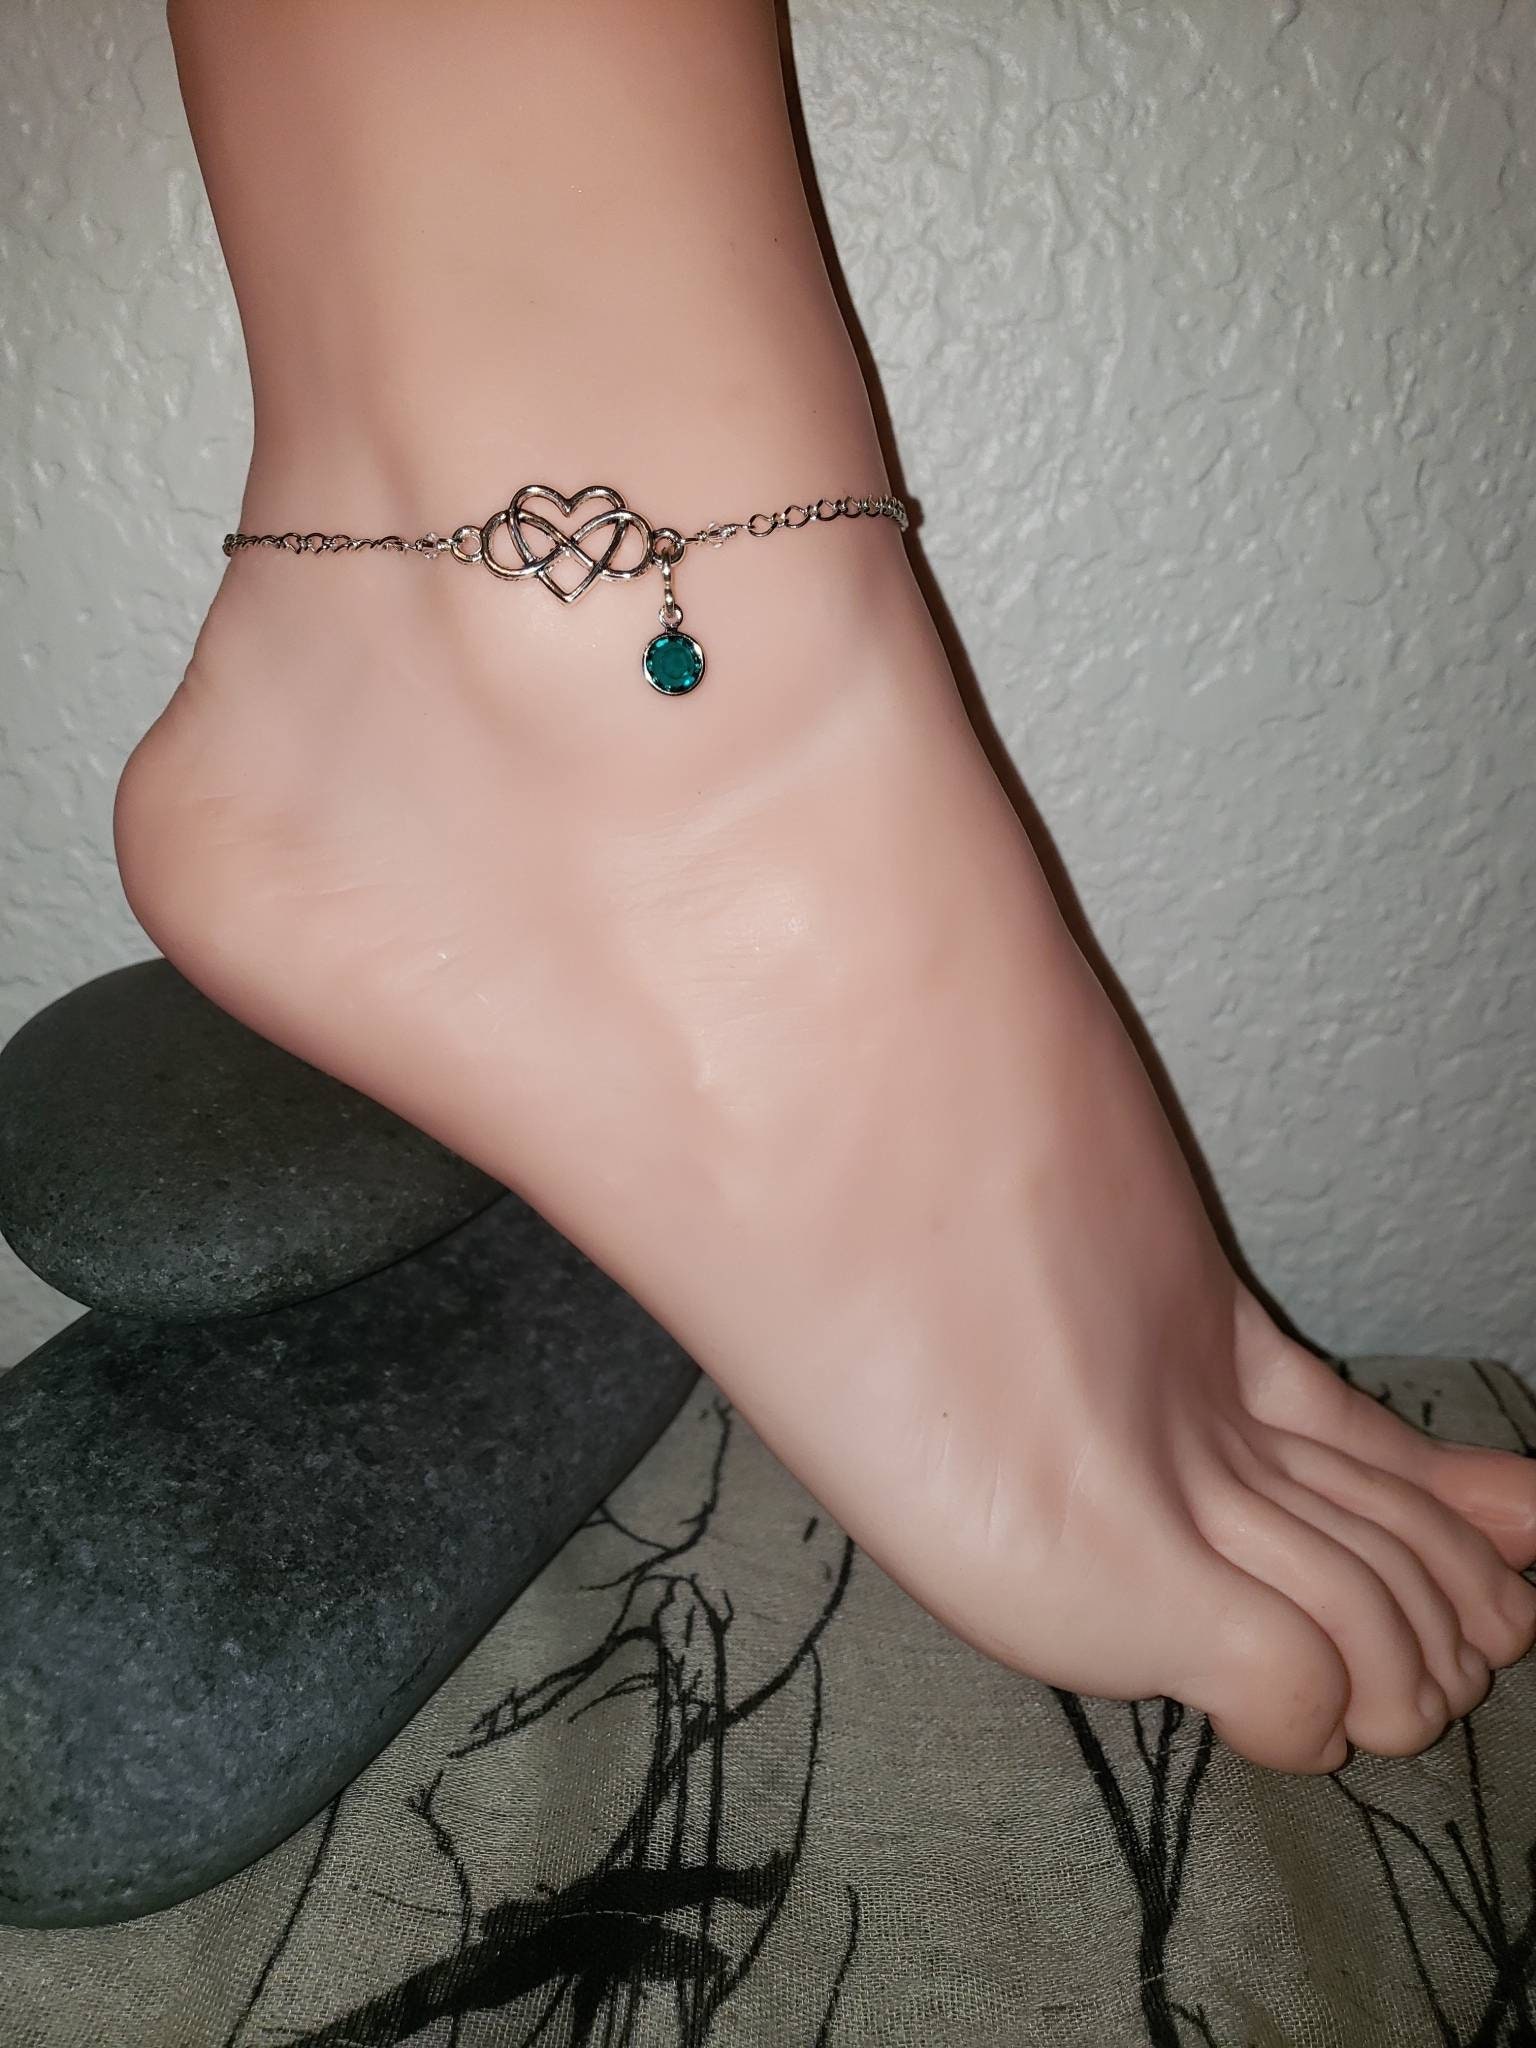 meaning of ankle chain swinger